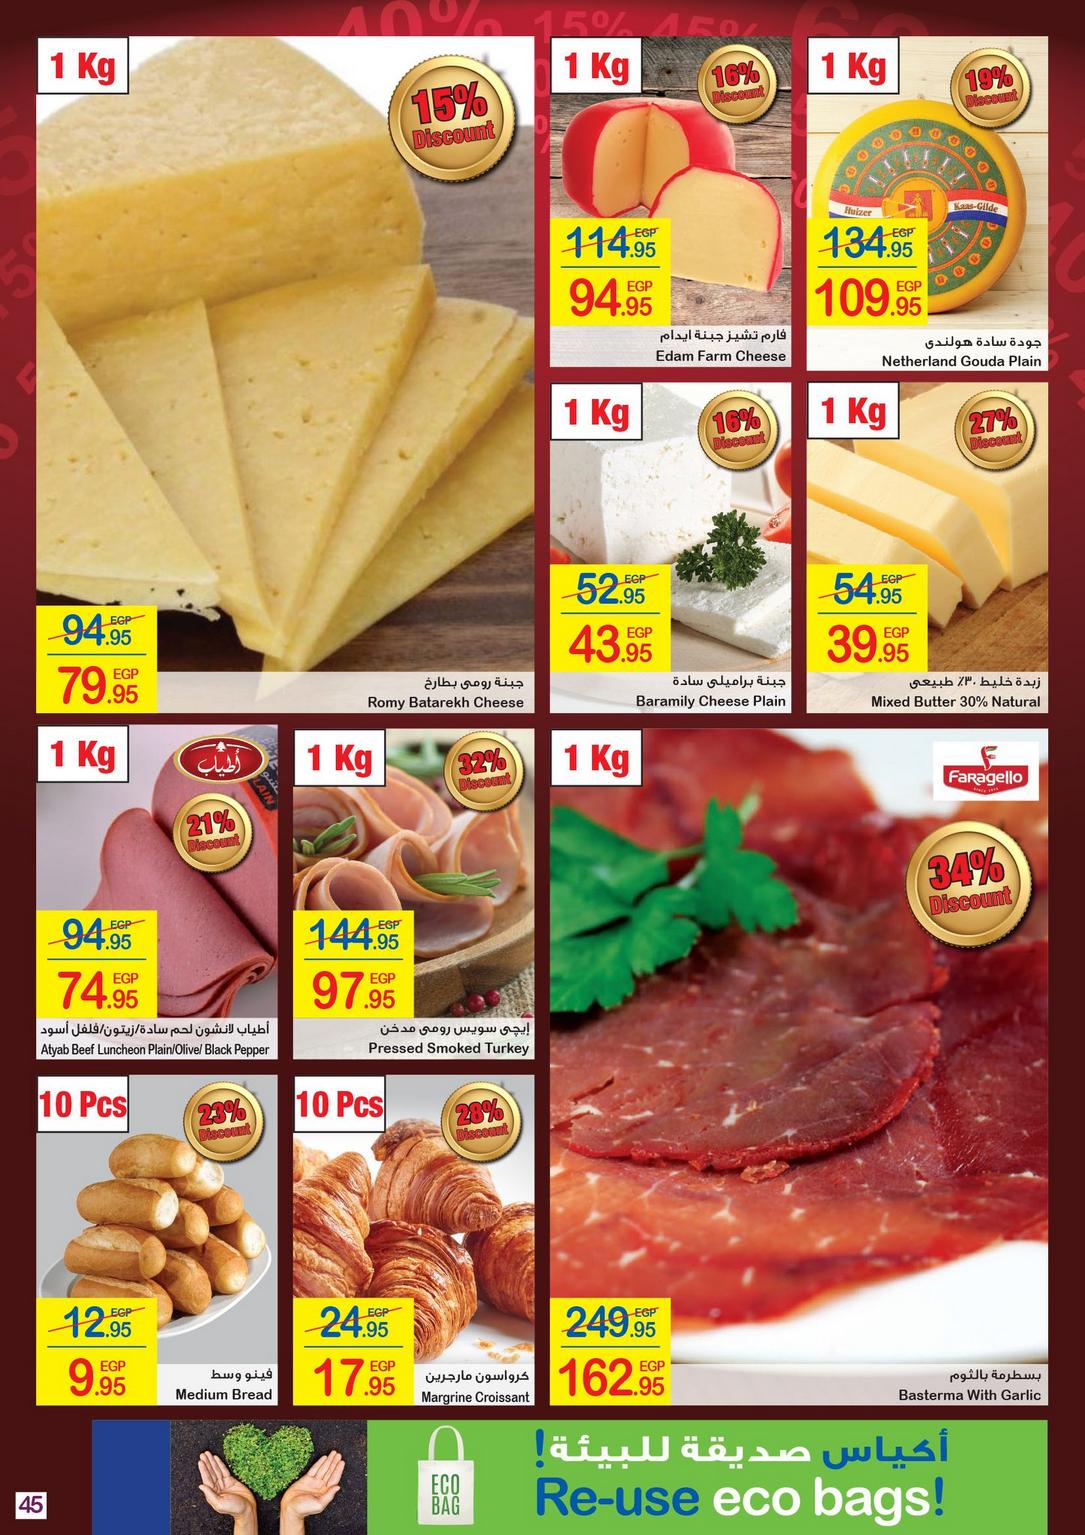 Carrefour Deals from 1/1 till 14/1 | Carrefour Egypt 46